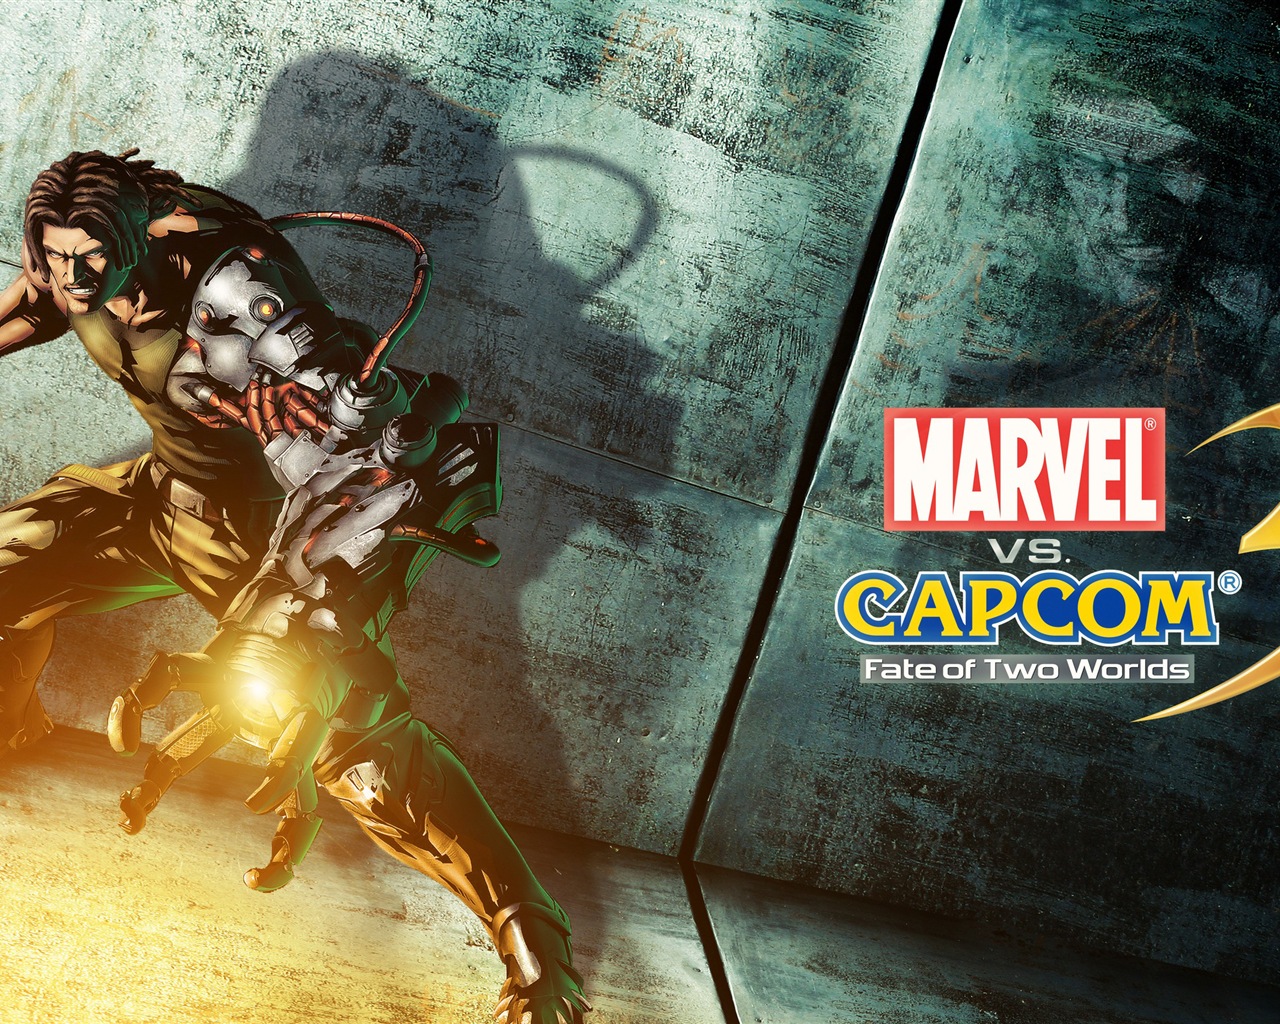 Marvel VS. Capcom 3: Fate of Two Worlds HD game wallpapers #8 - 1280x1024